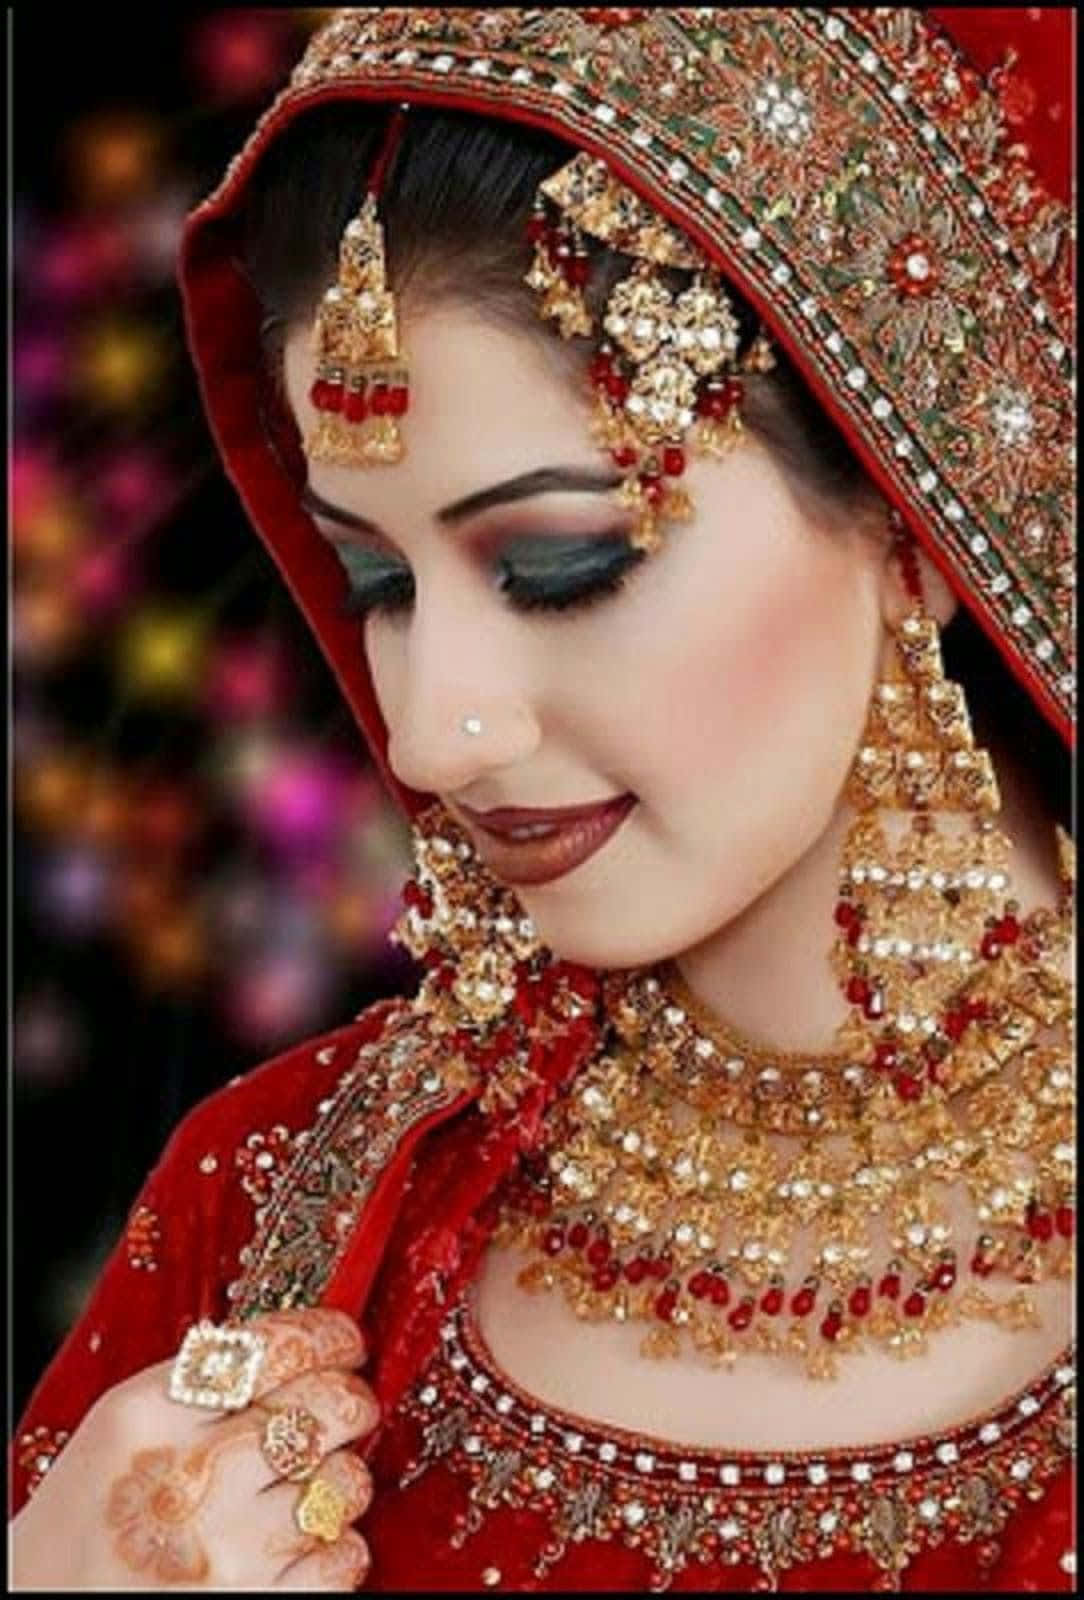 "Beauty for the Bride on her Special Day"